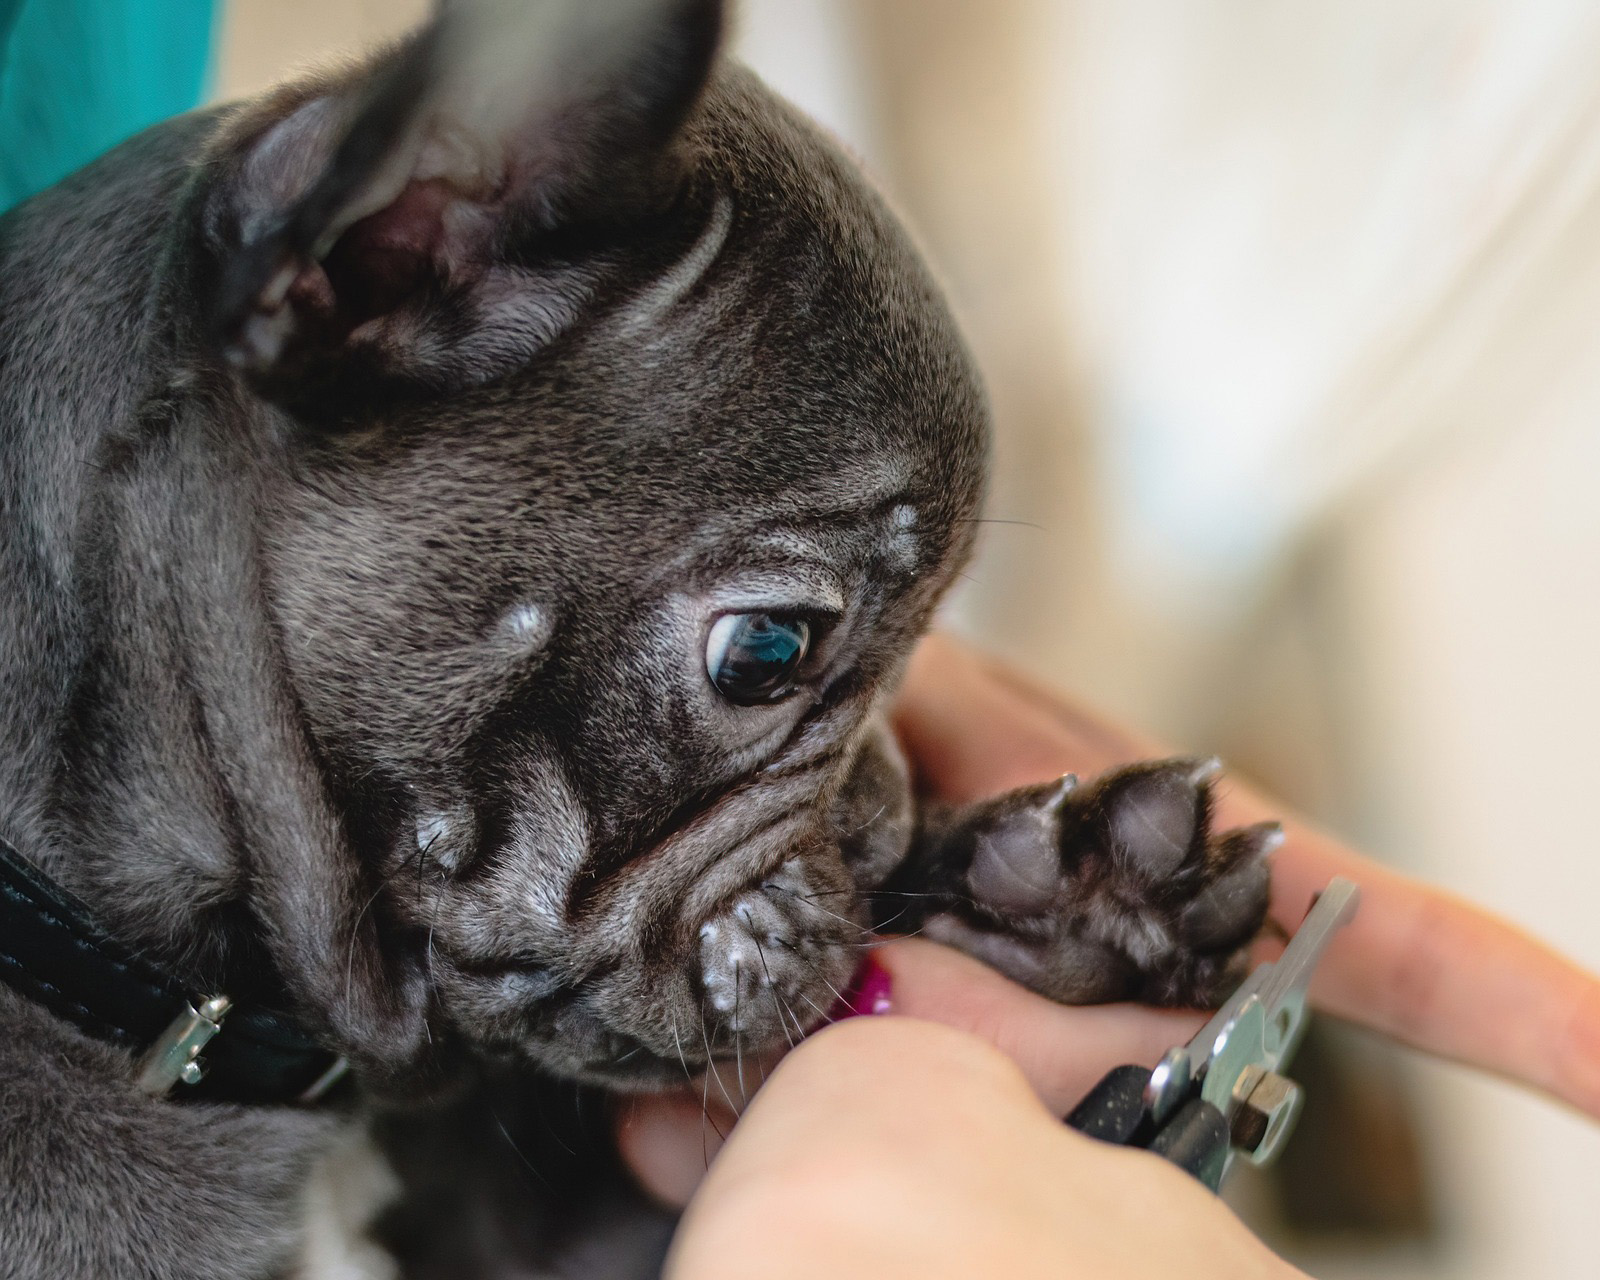 A French Bulldog pup getting it's nails clipped at the grooming salon